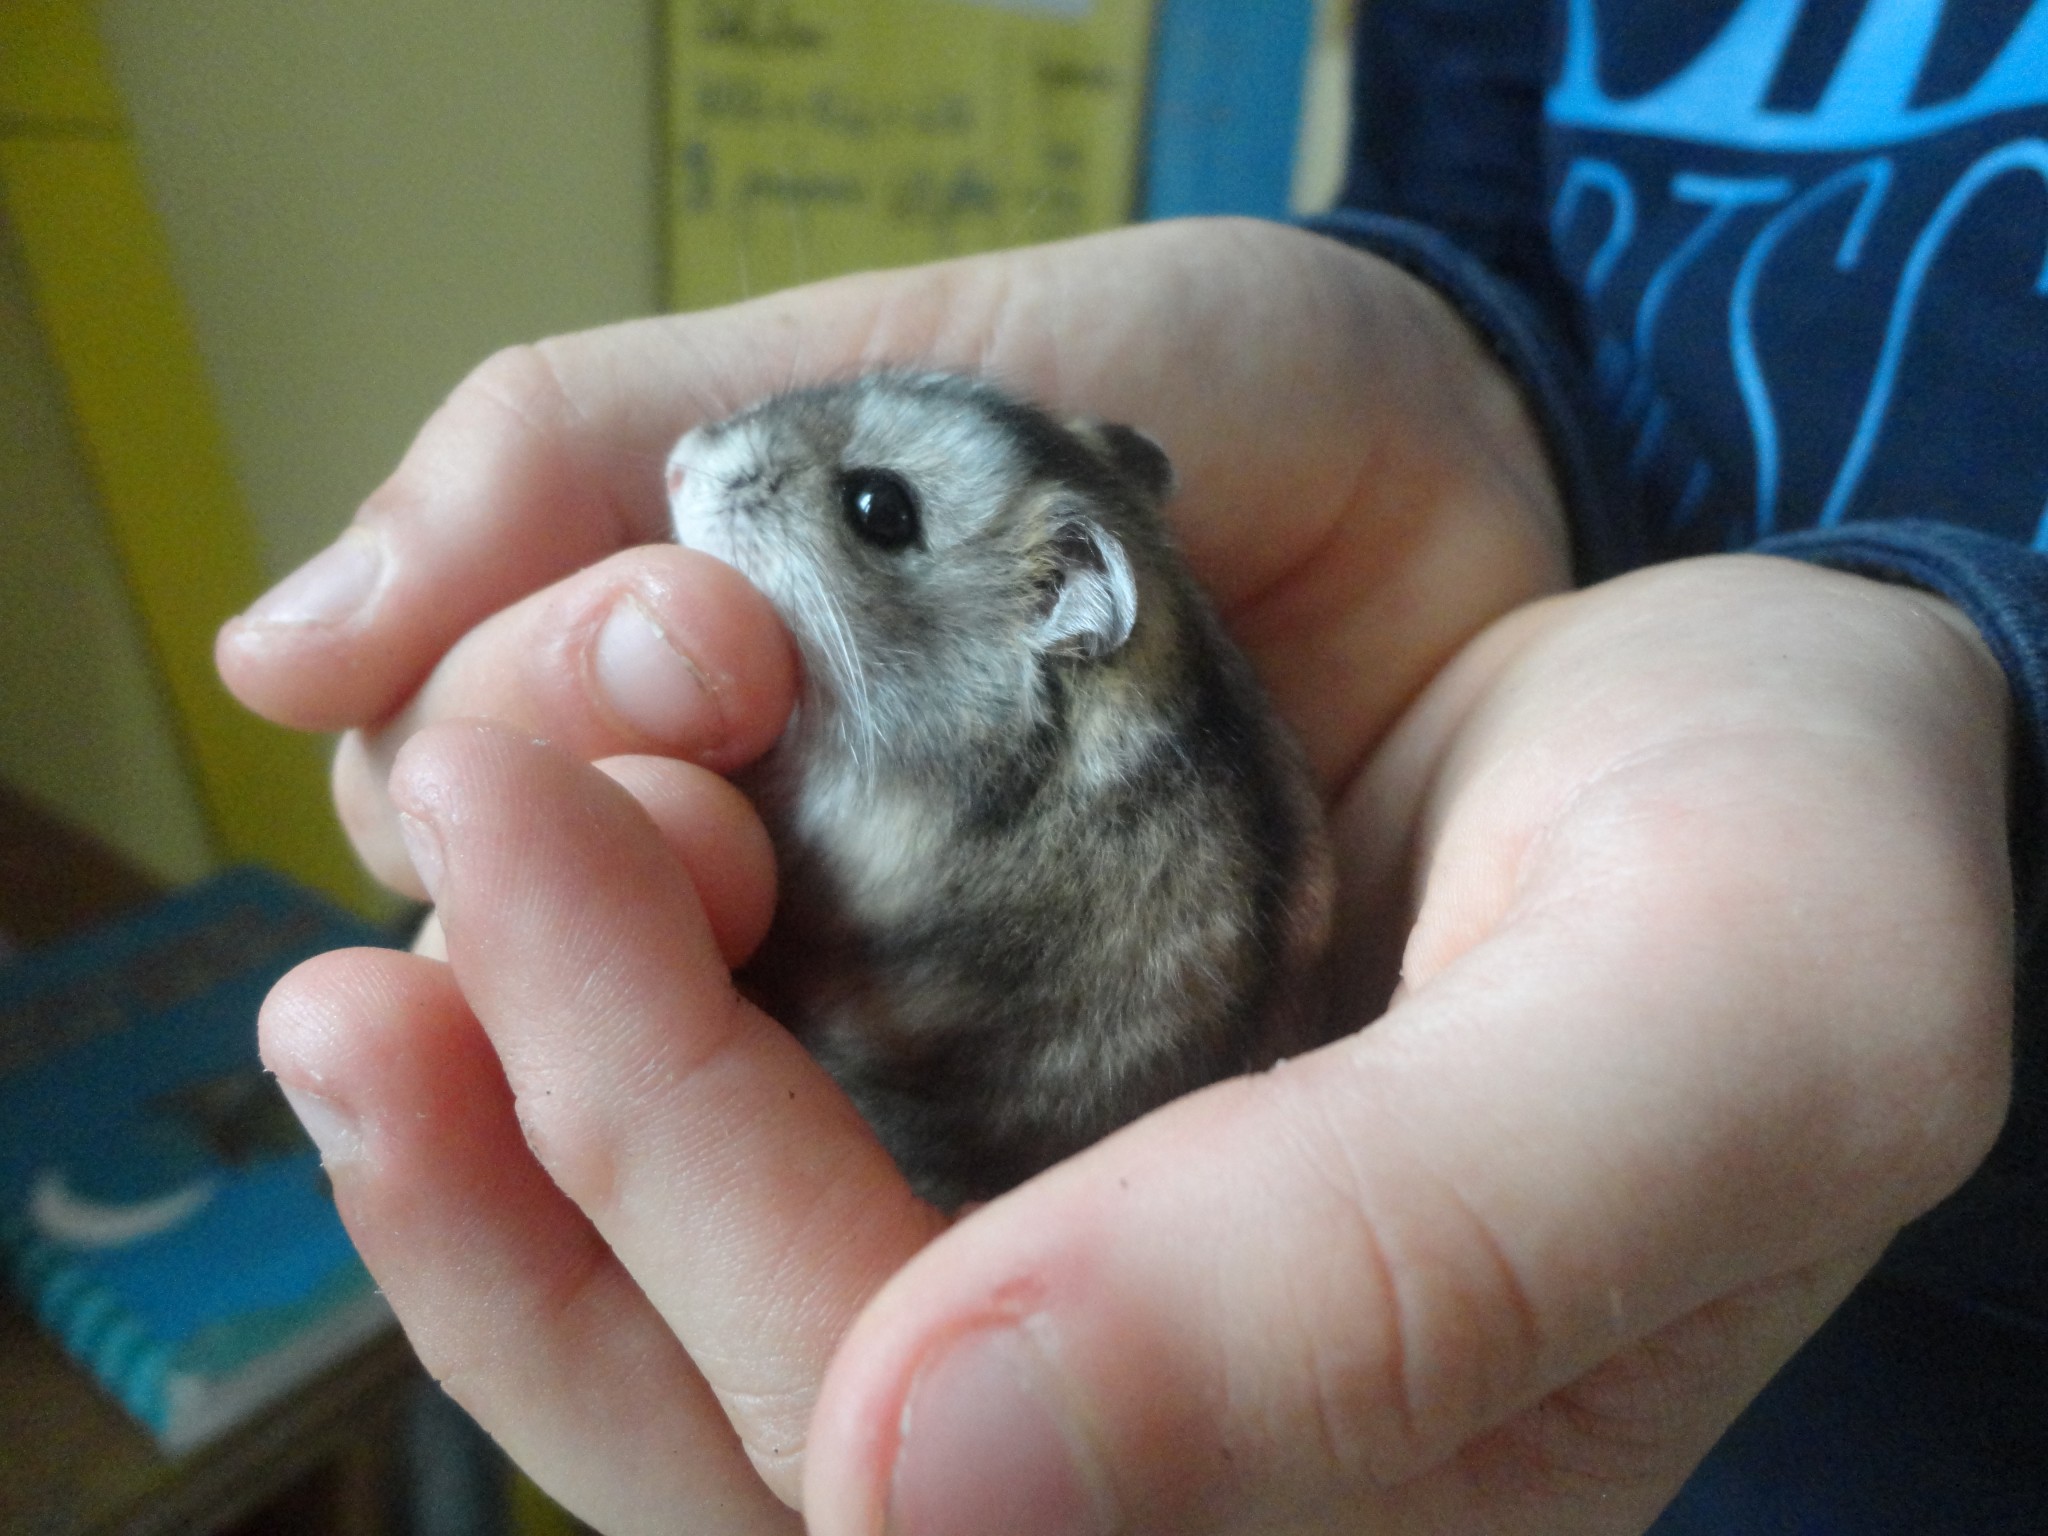 Cannelle Notre Hamster Russe